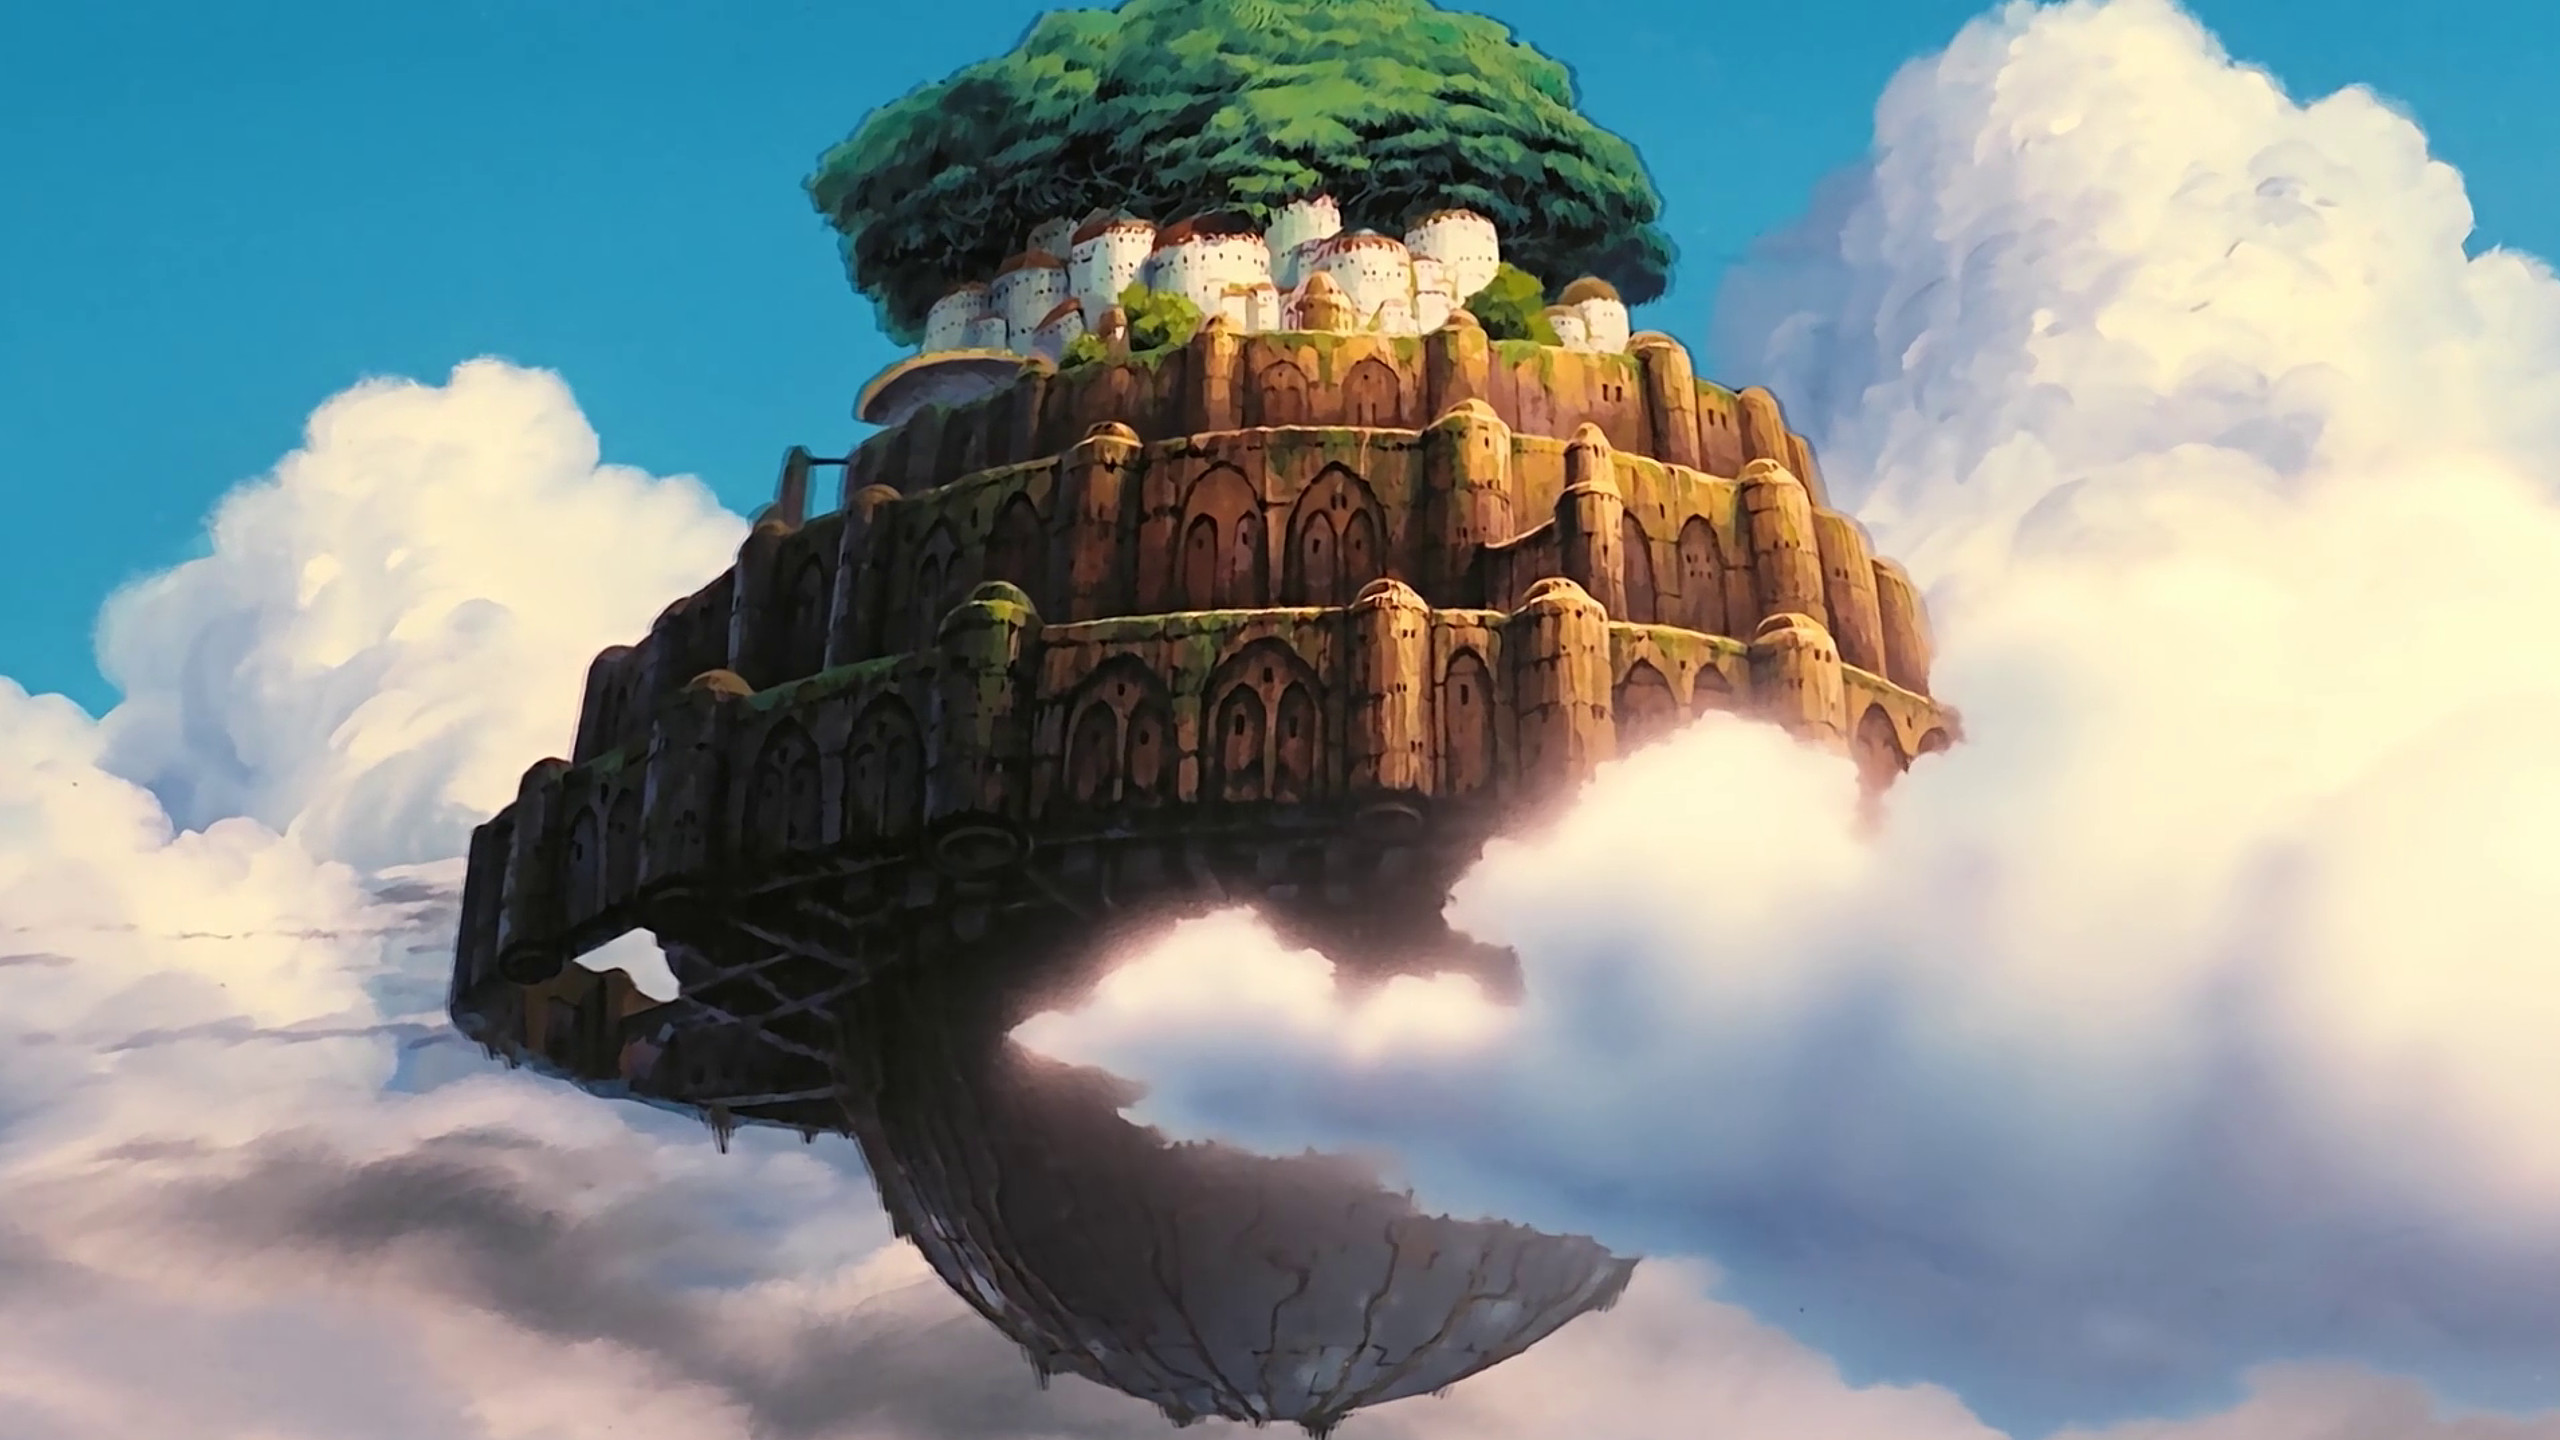 2560x1440 I have a huge collection of 1440p Studio Ghibli wallpapers, here is one of  them